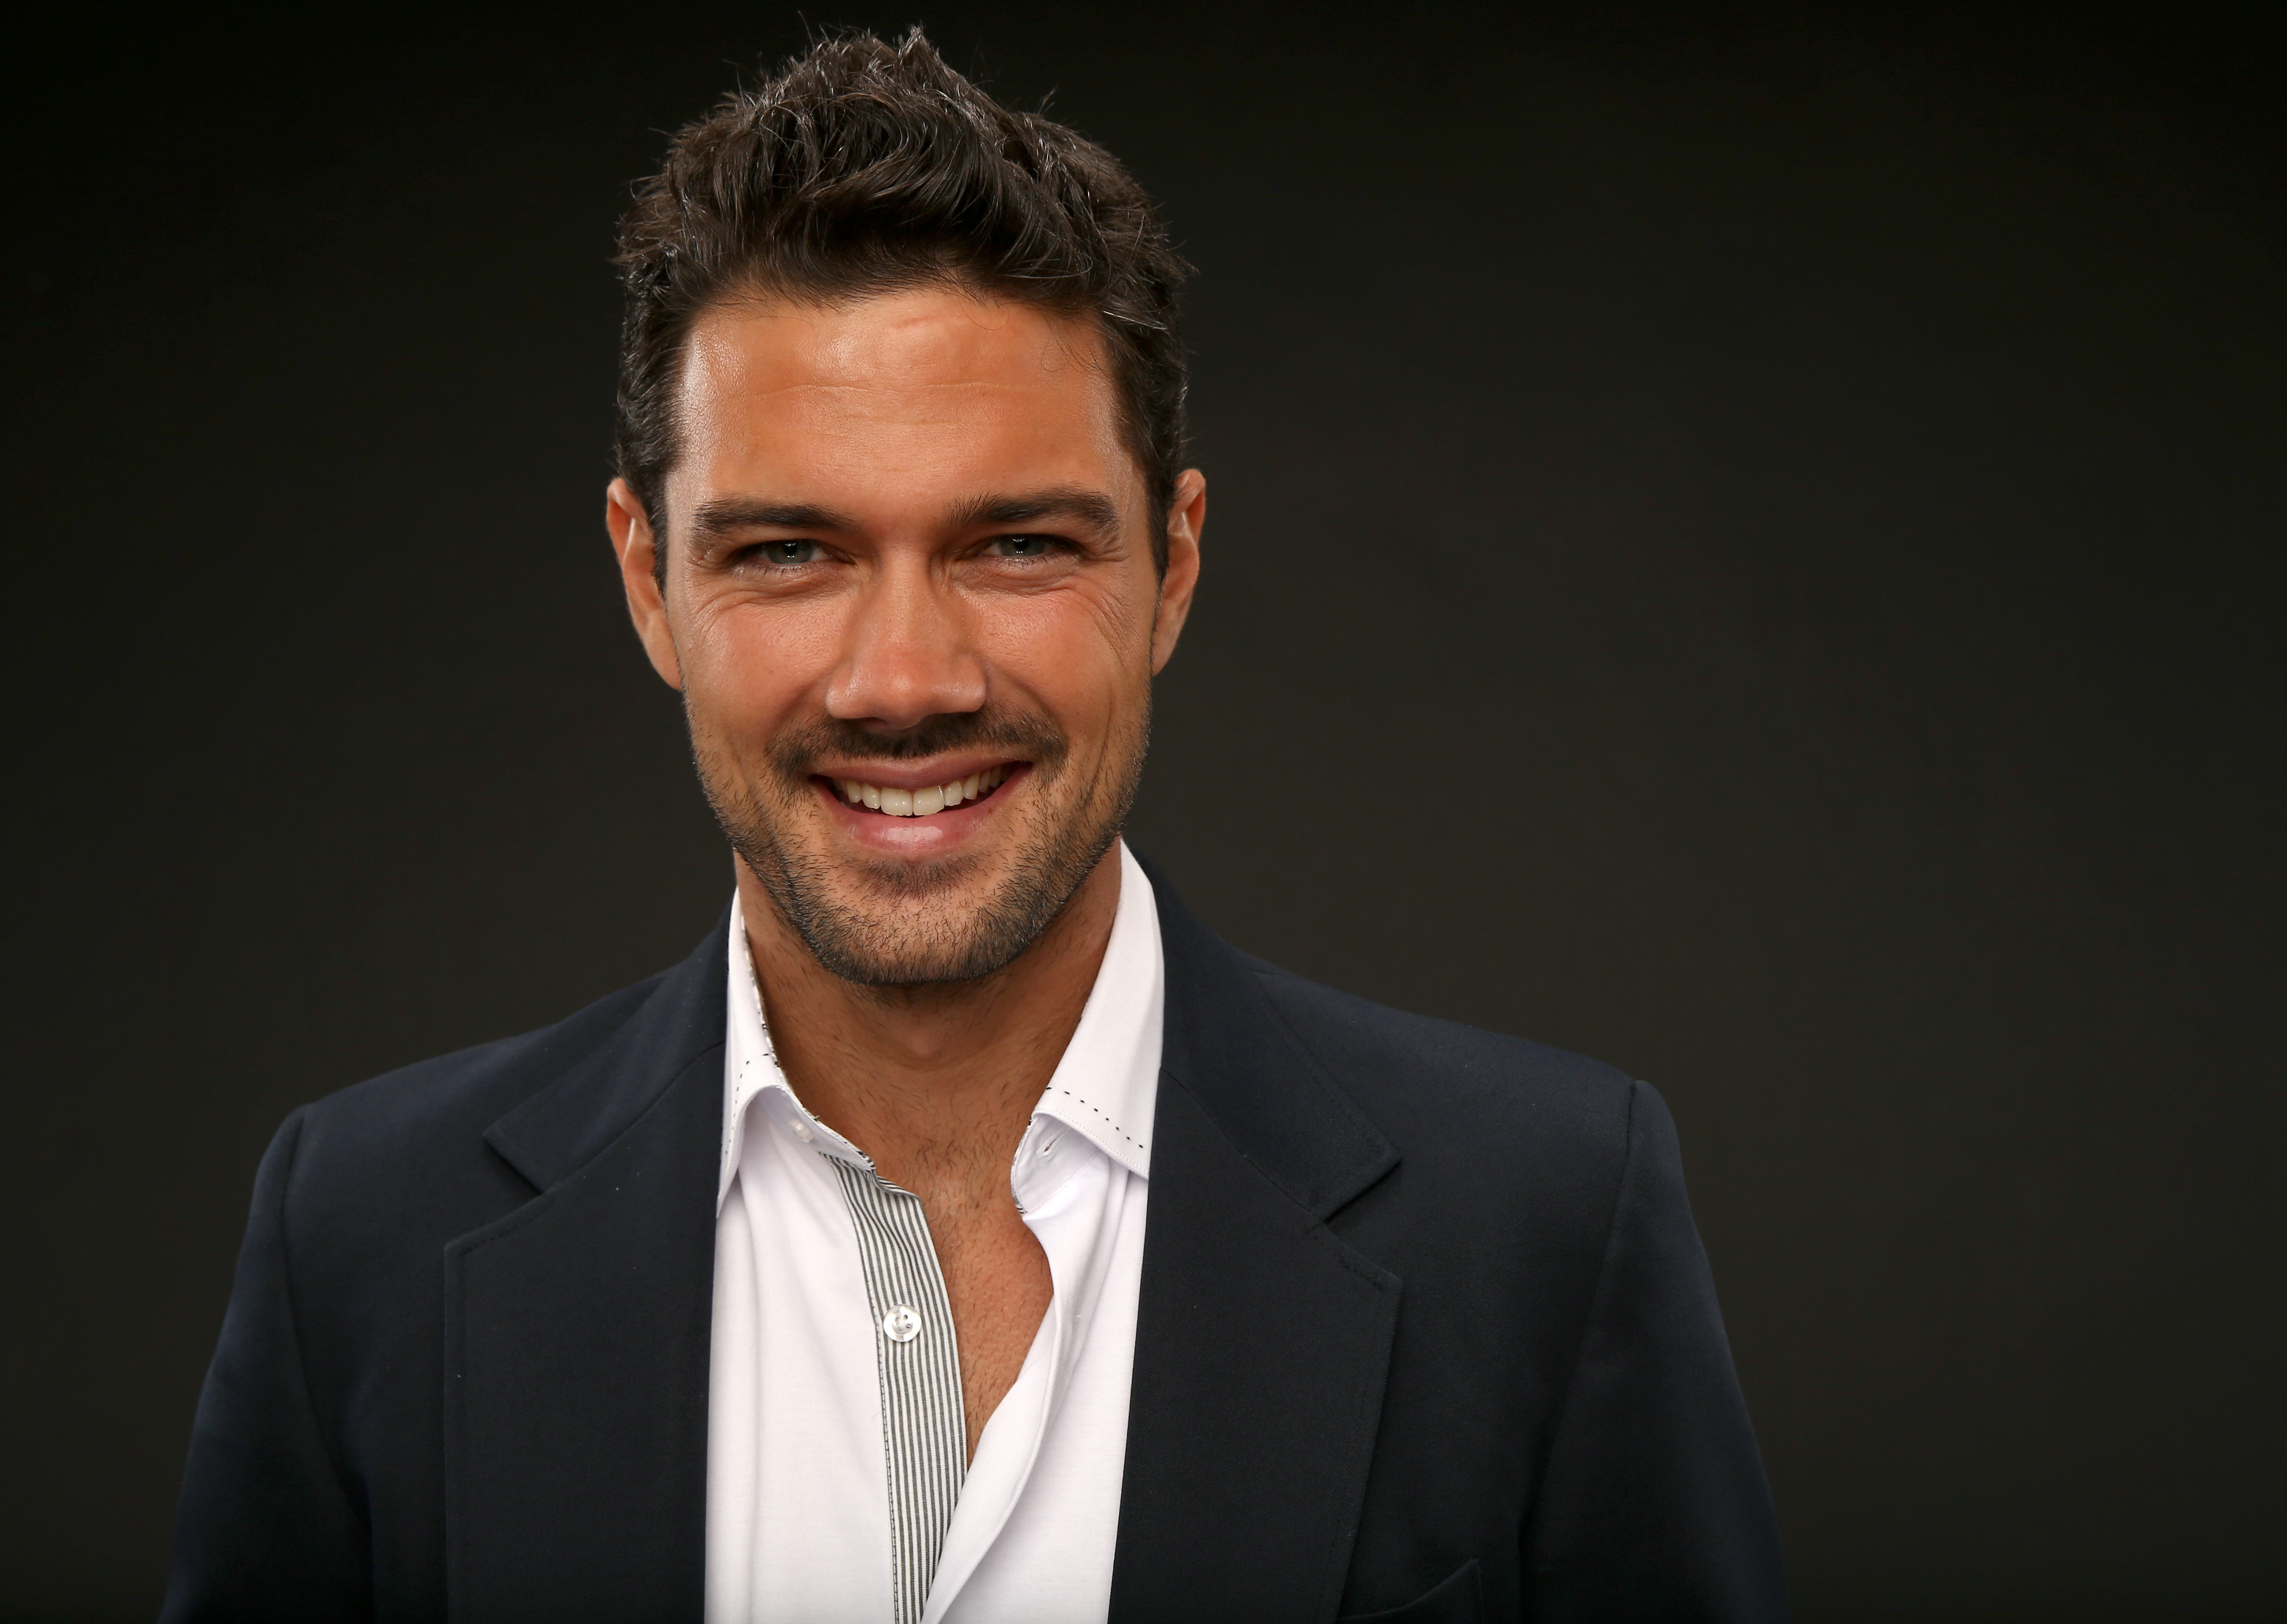 'General Hospital' actor Ryan Paevey poses for a portrait during the 2014 TCA summer press tour